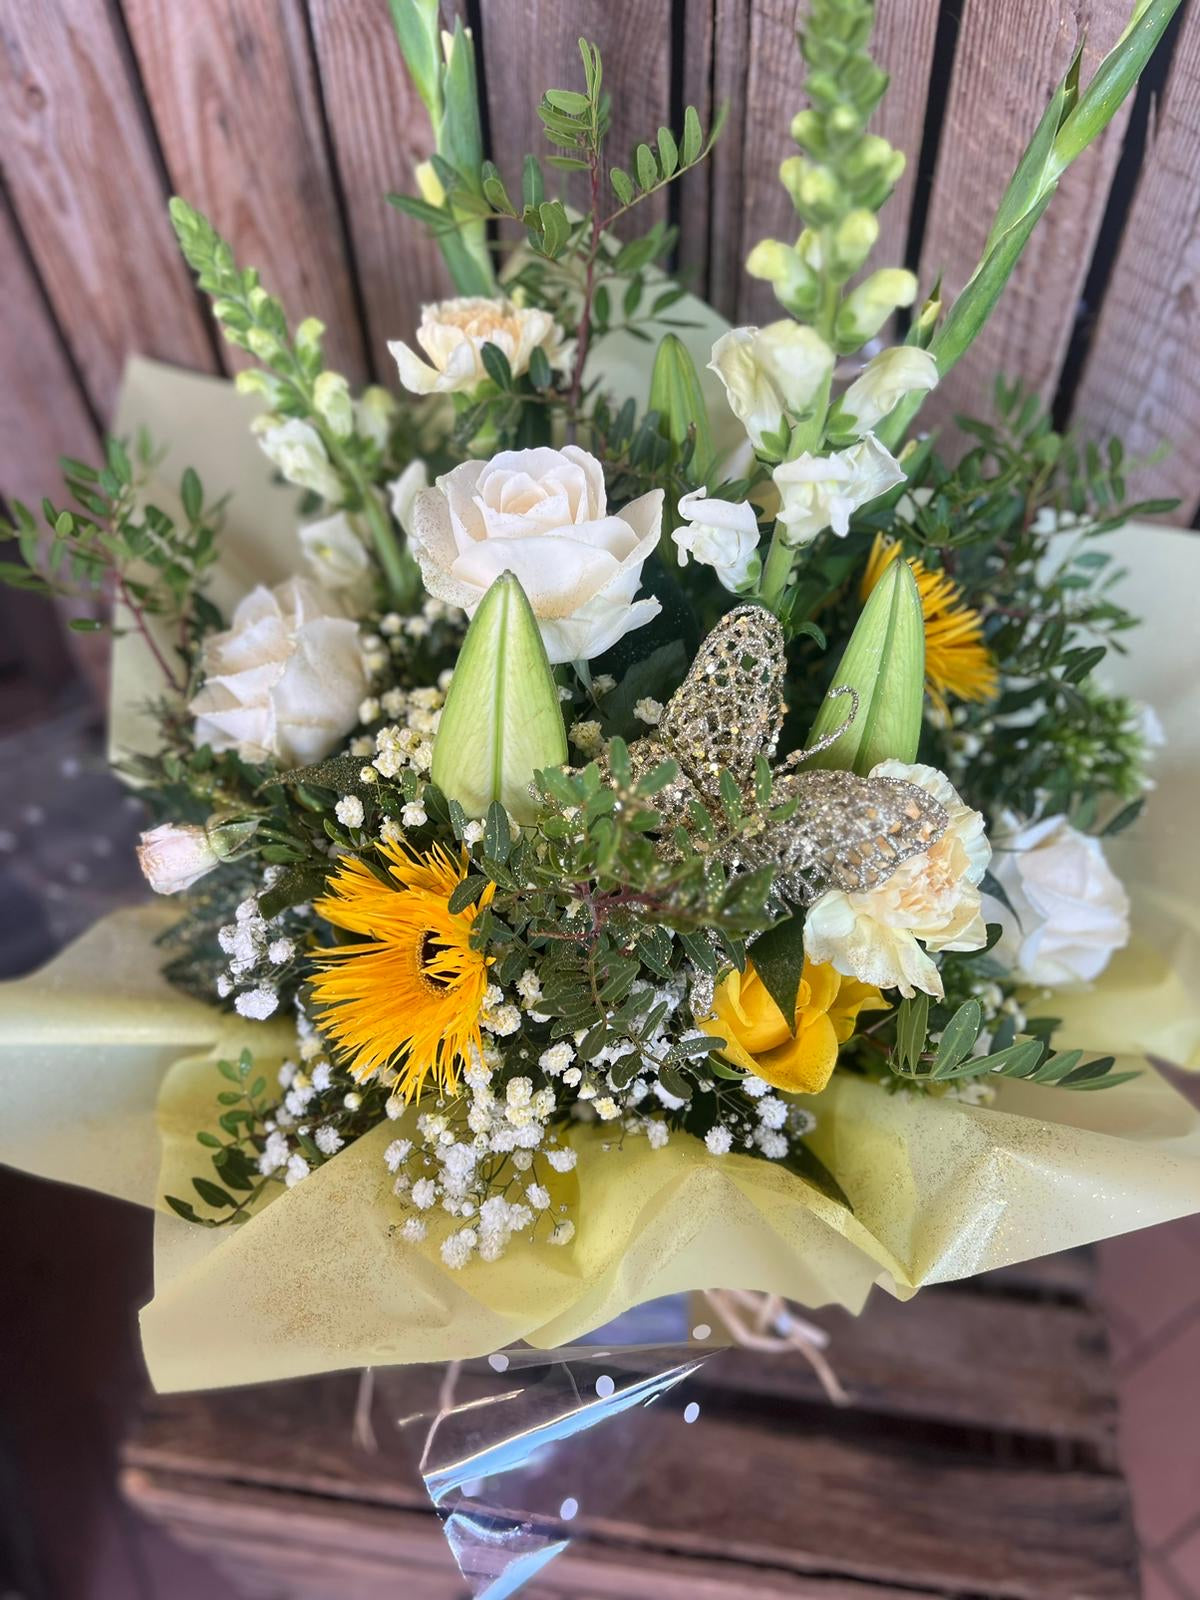 Mixed Beautiful Flower Bouquet - White and Yellow Flowers